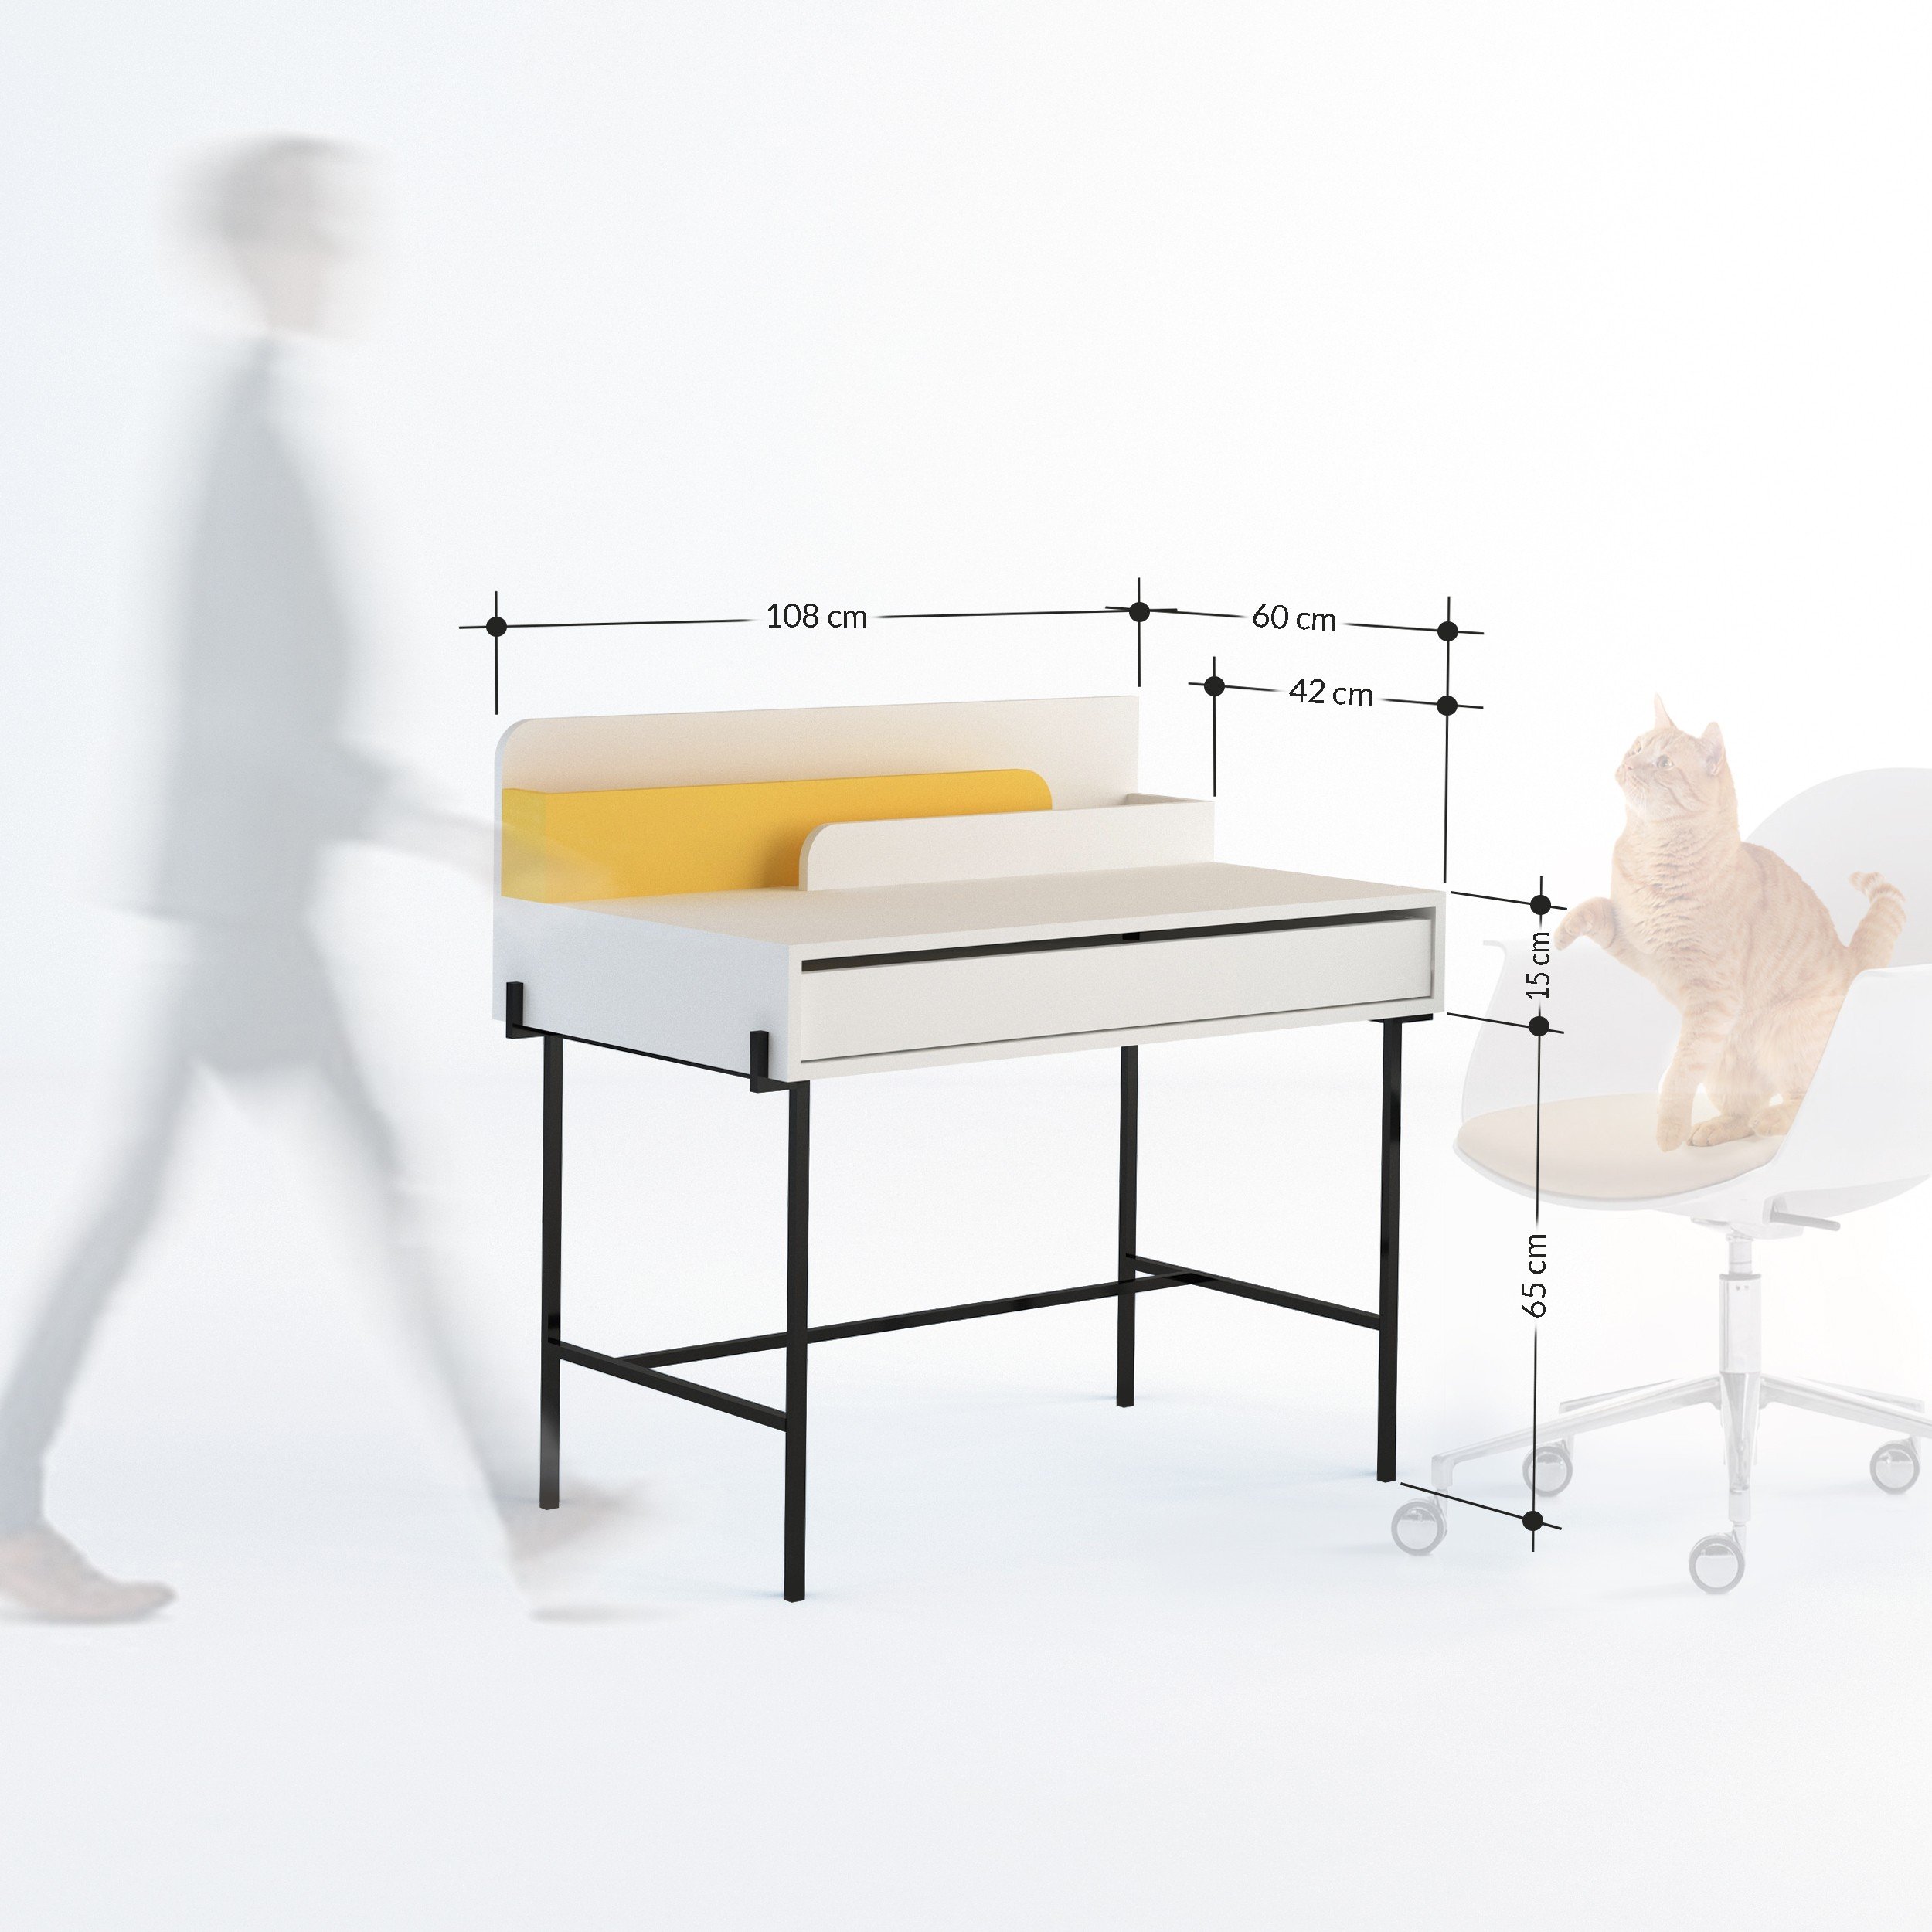 LEILA WORKING TABLE - WHITE - MUSTARD M.MS.23313.2